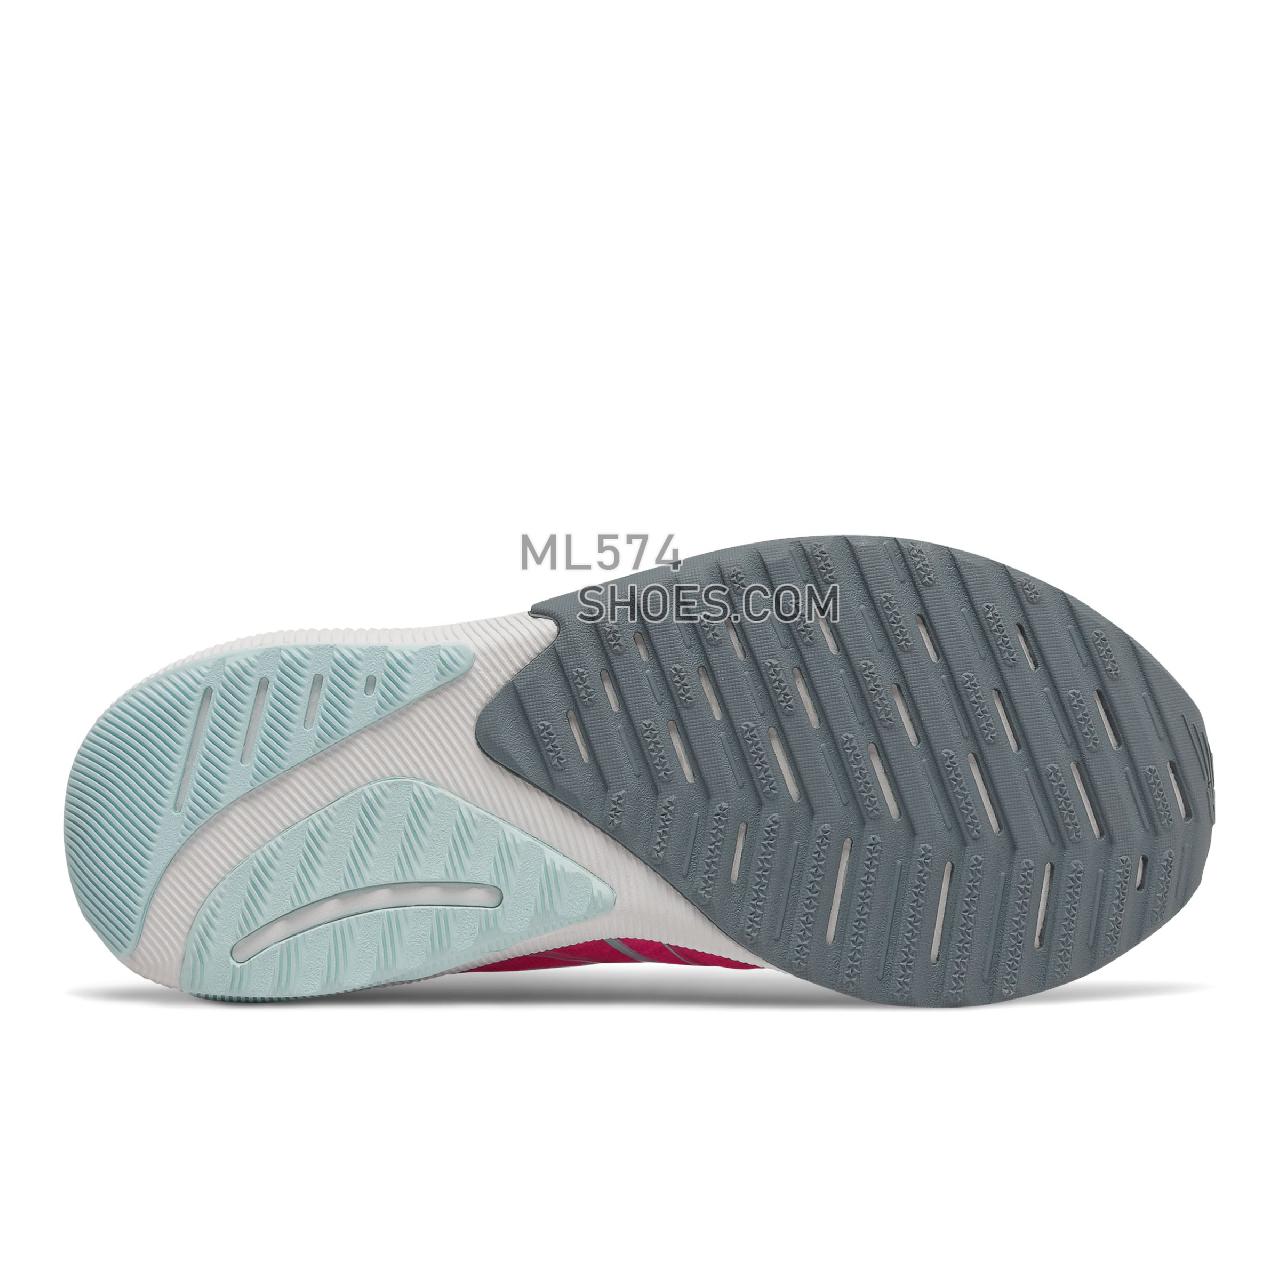 New Balance FuelCell Propel v3 - Women's Neutral Running - Pink Glo with Deep Ocean Grey - WFCPRLP3